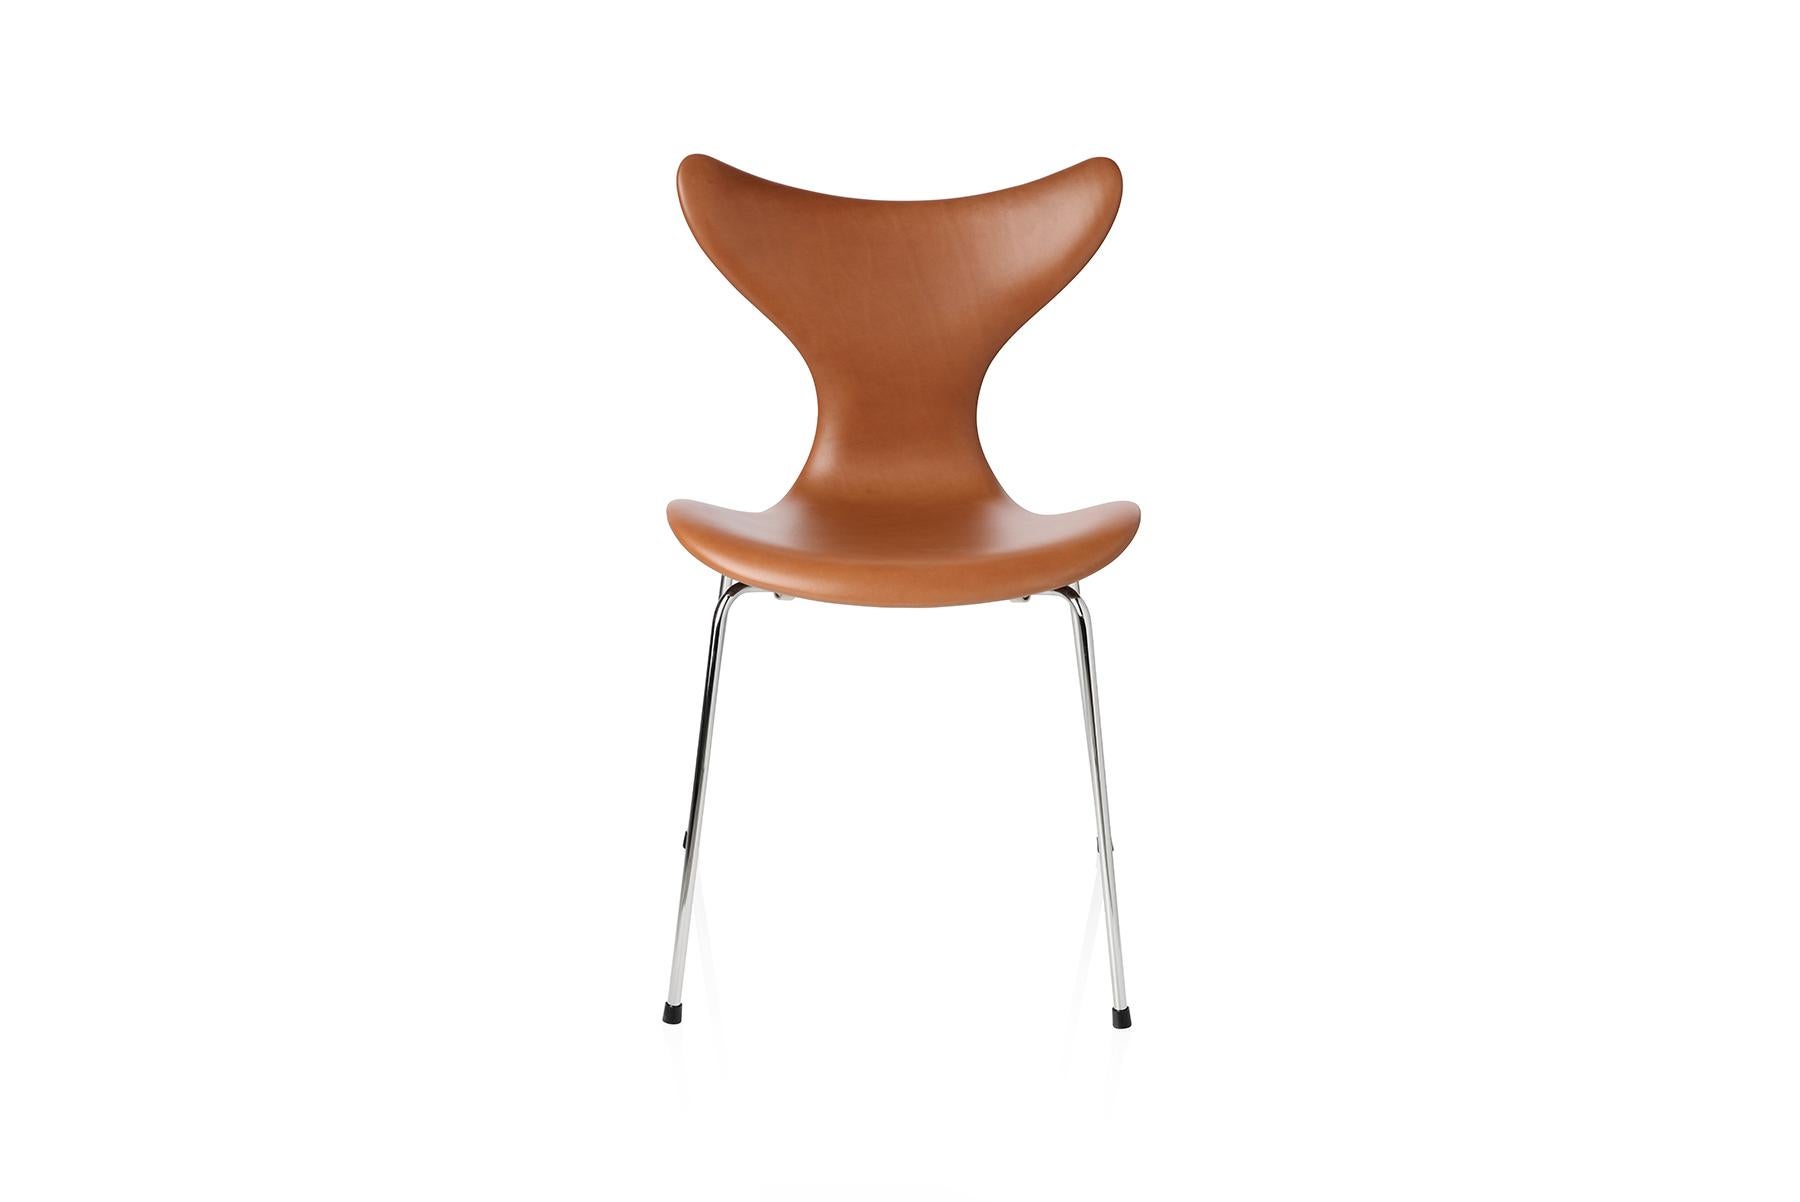 This series 8 chair was originally designed for the Danish National Bank. It is often referred to as the Lily™. The first model was 3108 from 1968, and the chair was introduced to the market with arms, model 3208, at the Danish Furniture Fair in